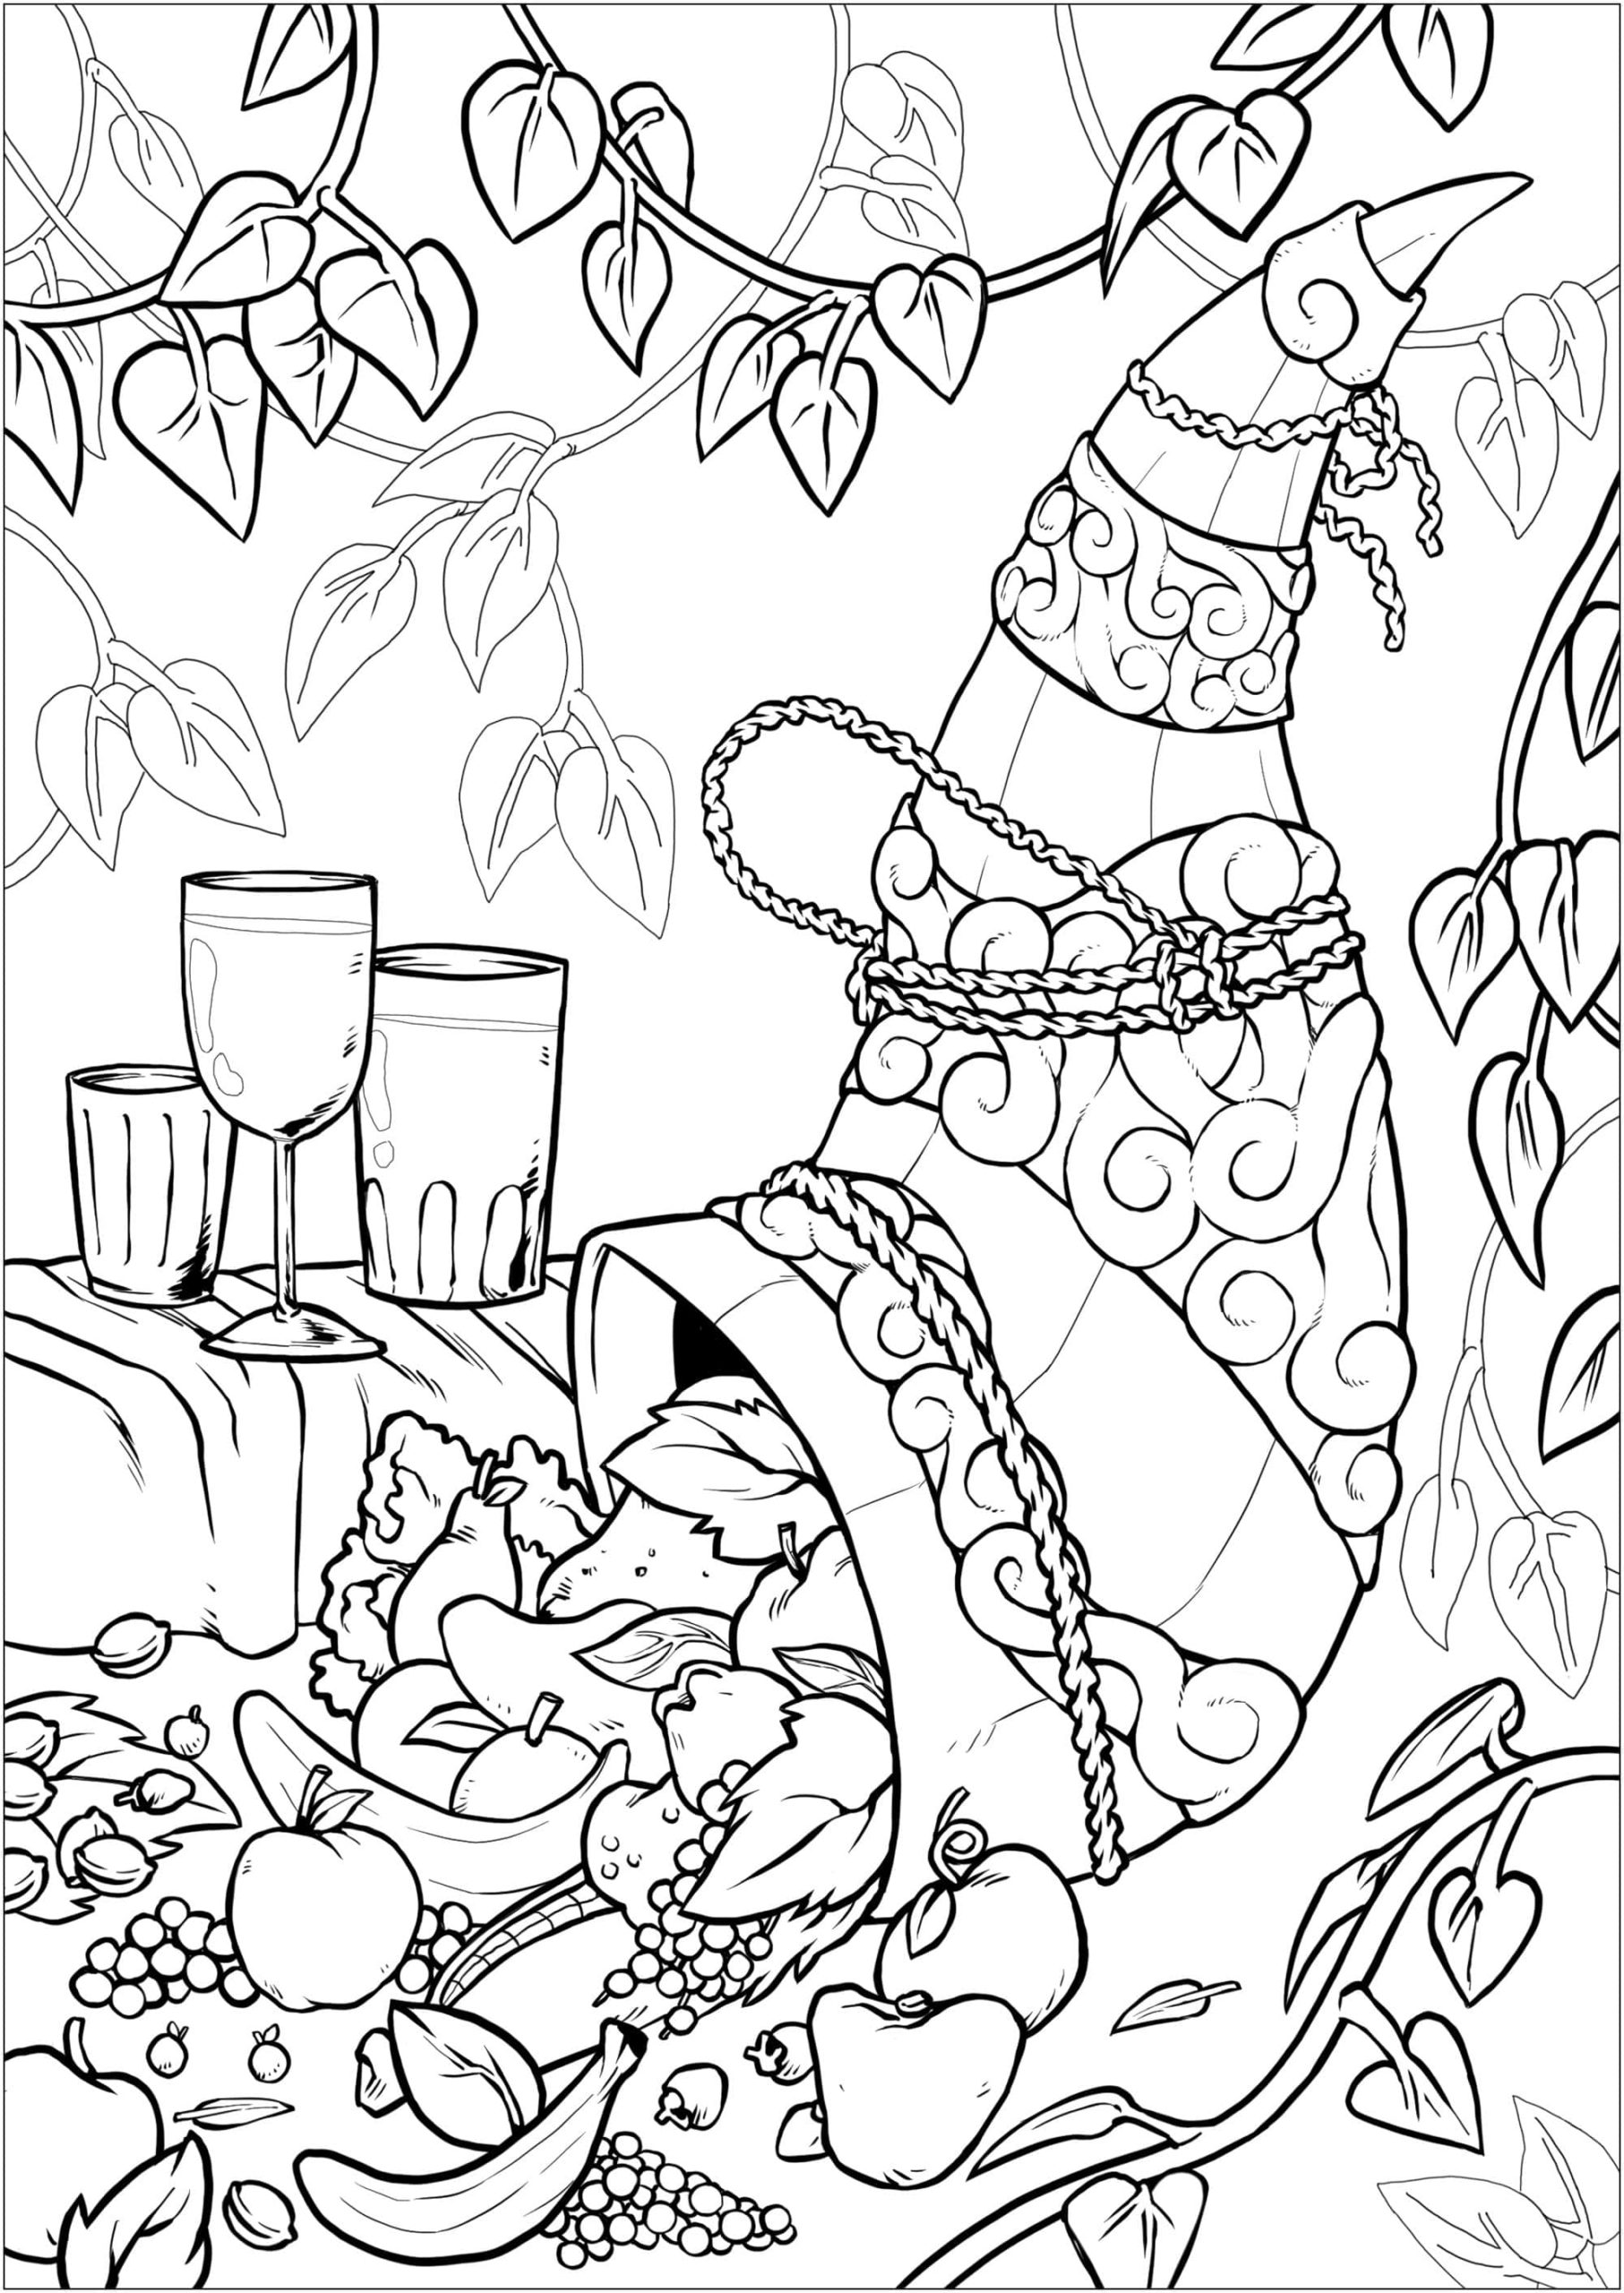 Cornucopia Full of Fruit | Just Color | thanksgiving coloring pages disney